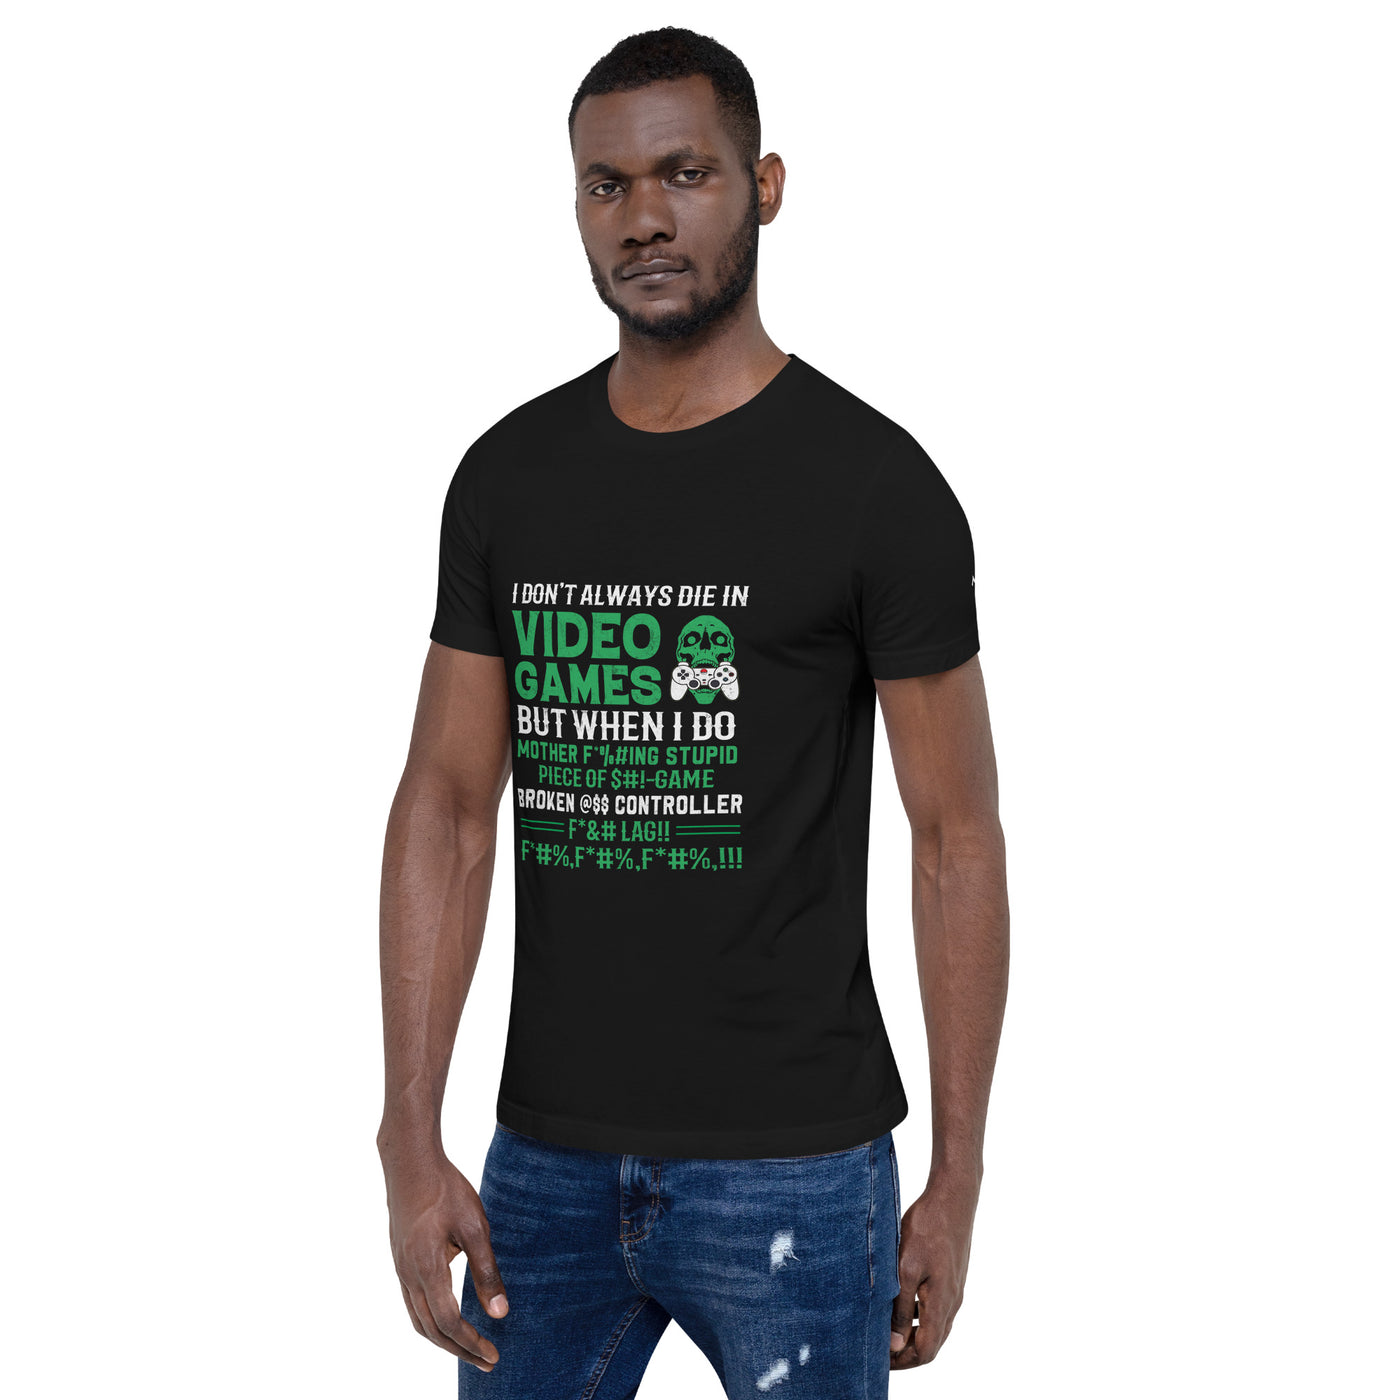 I don't always Die in Video games but when I Do mother - Unisex t-shirt